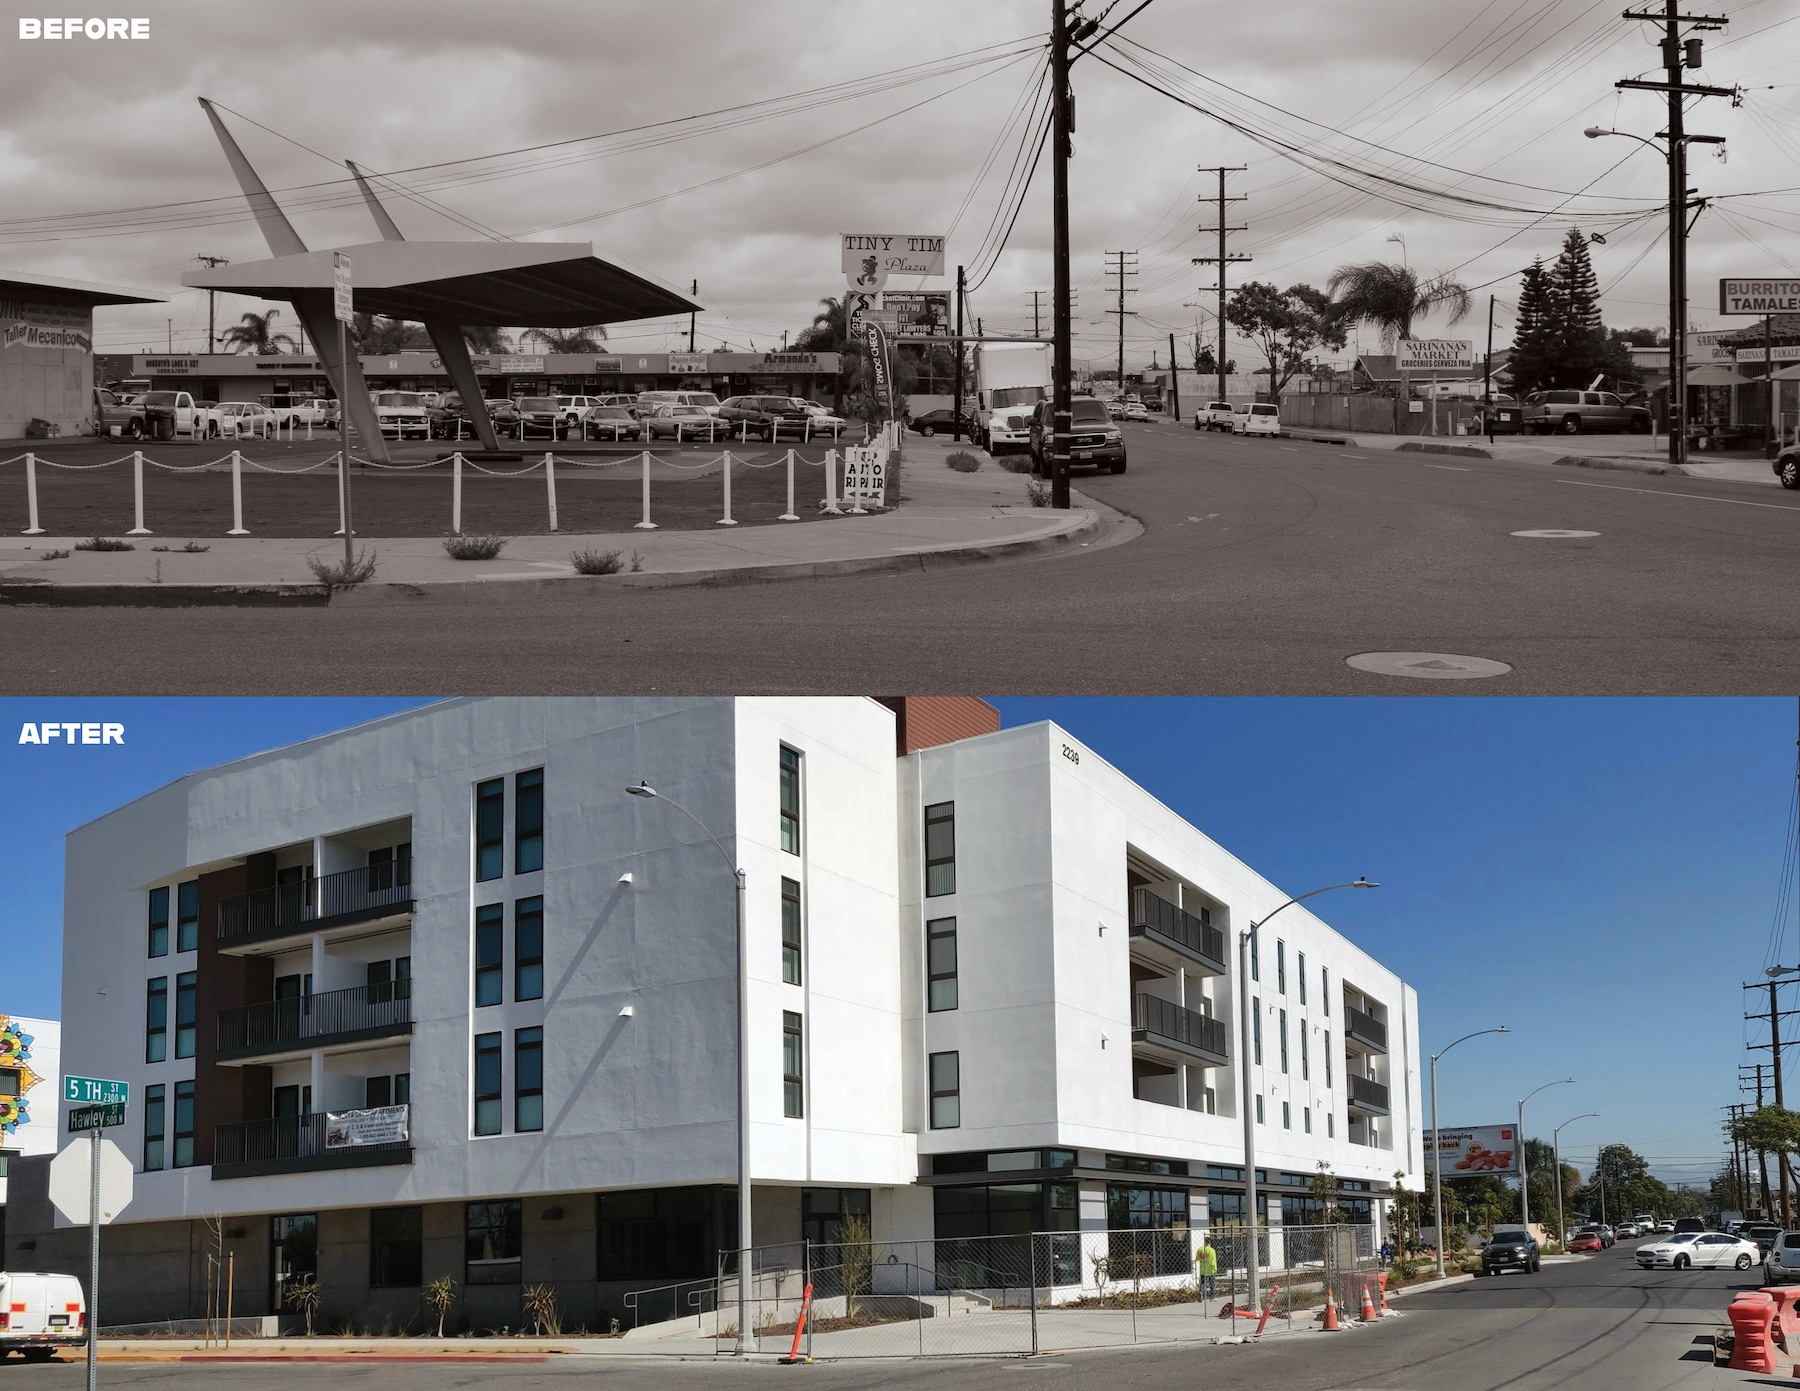 Tiny Tim Plaza’s Space Age gas station overhang (top) was removed to make way for the new residential structure (above). 